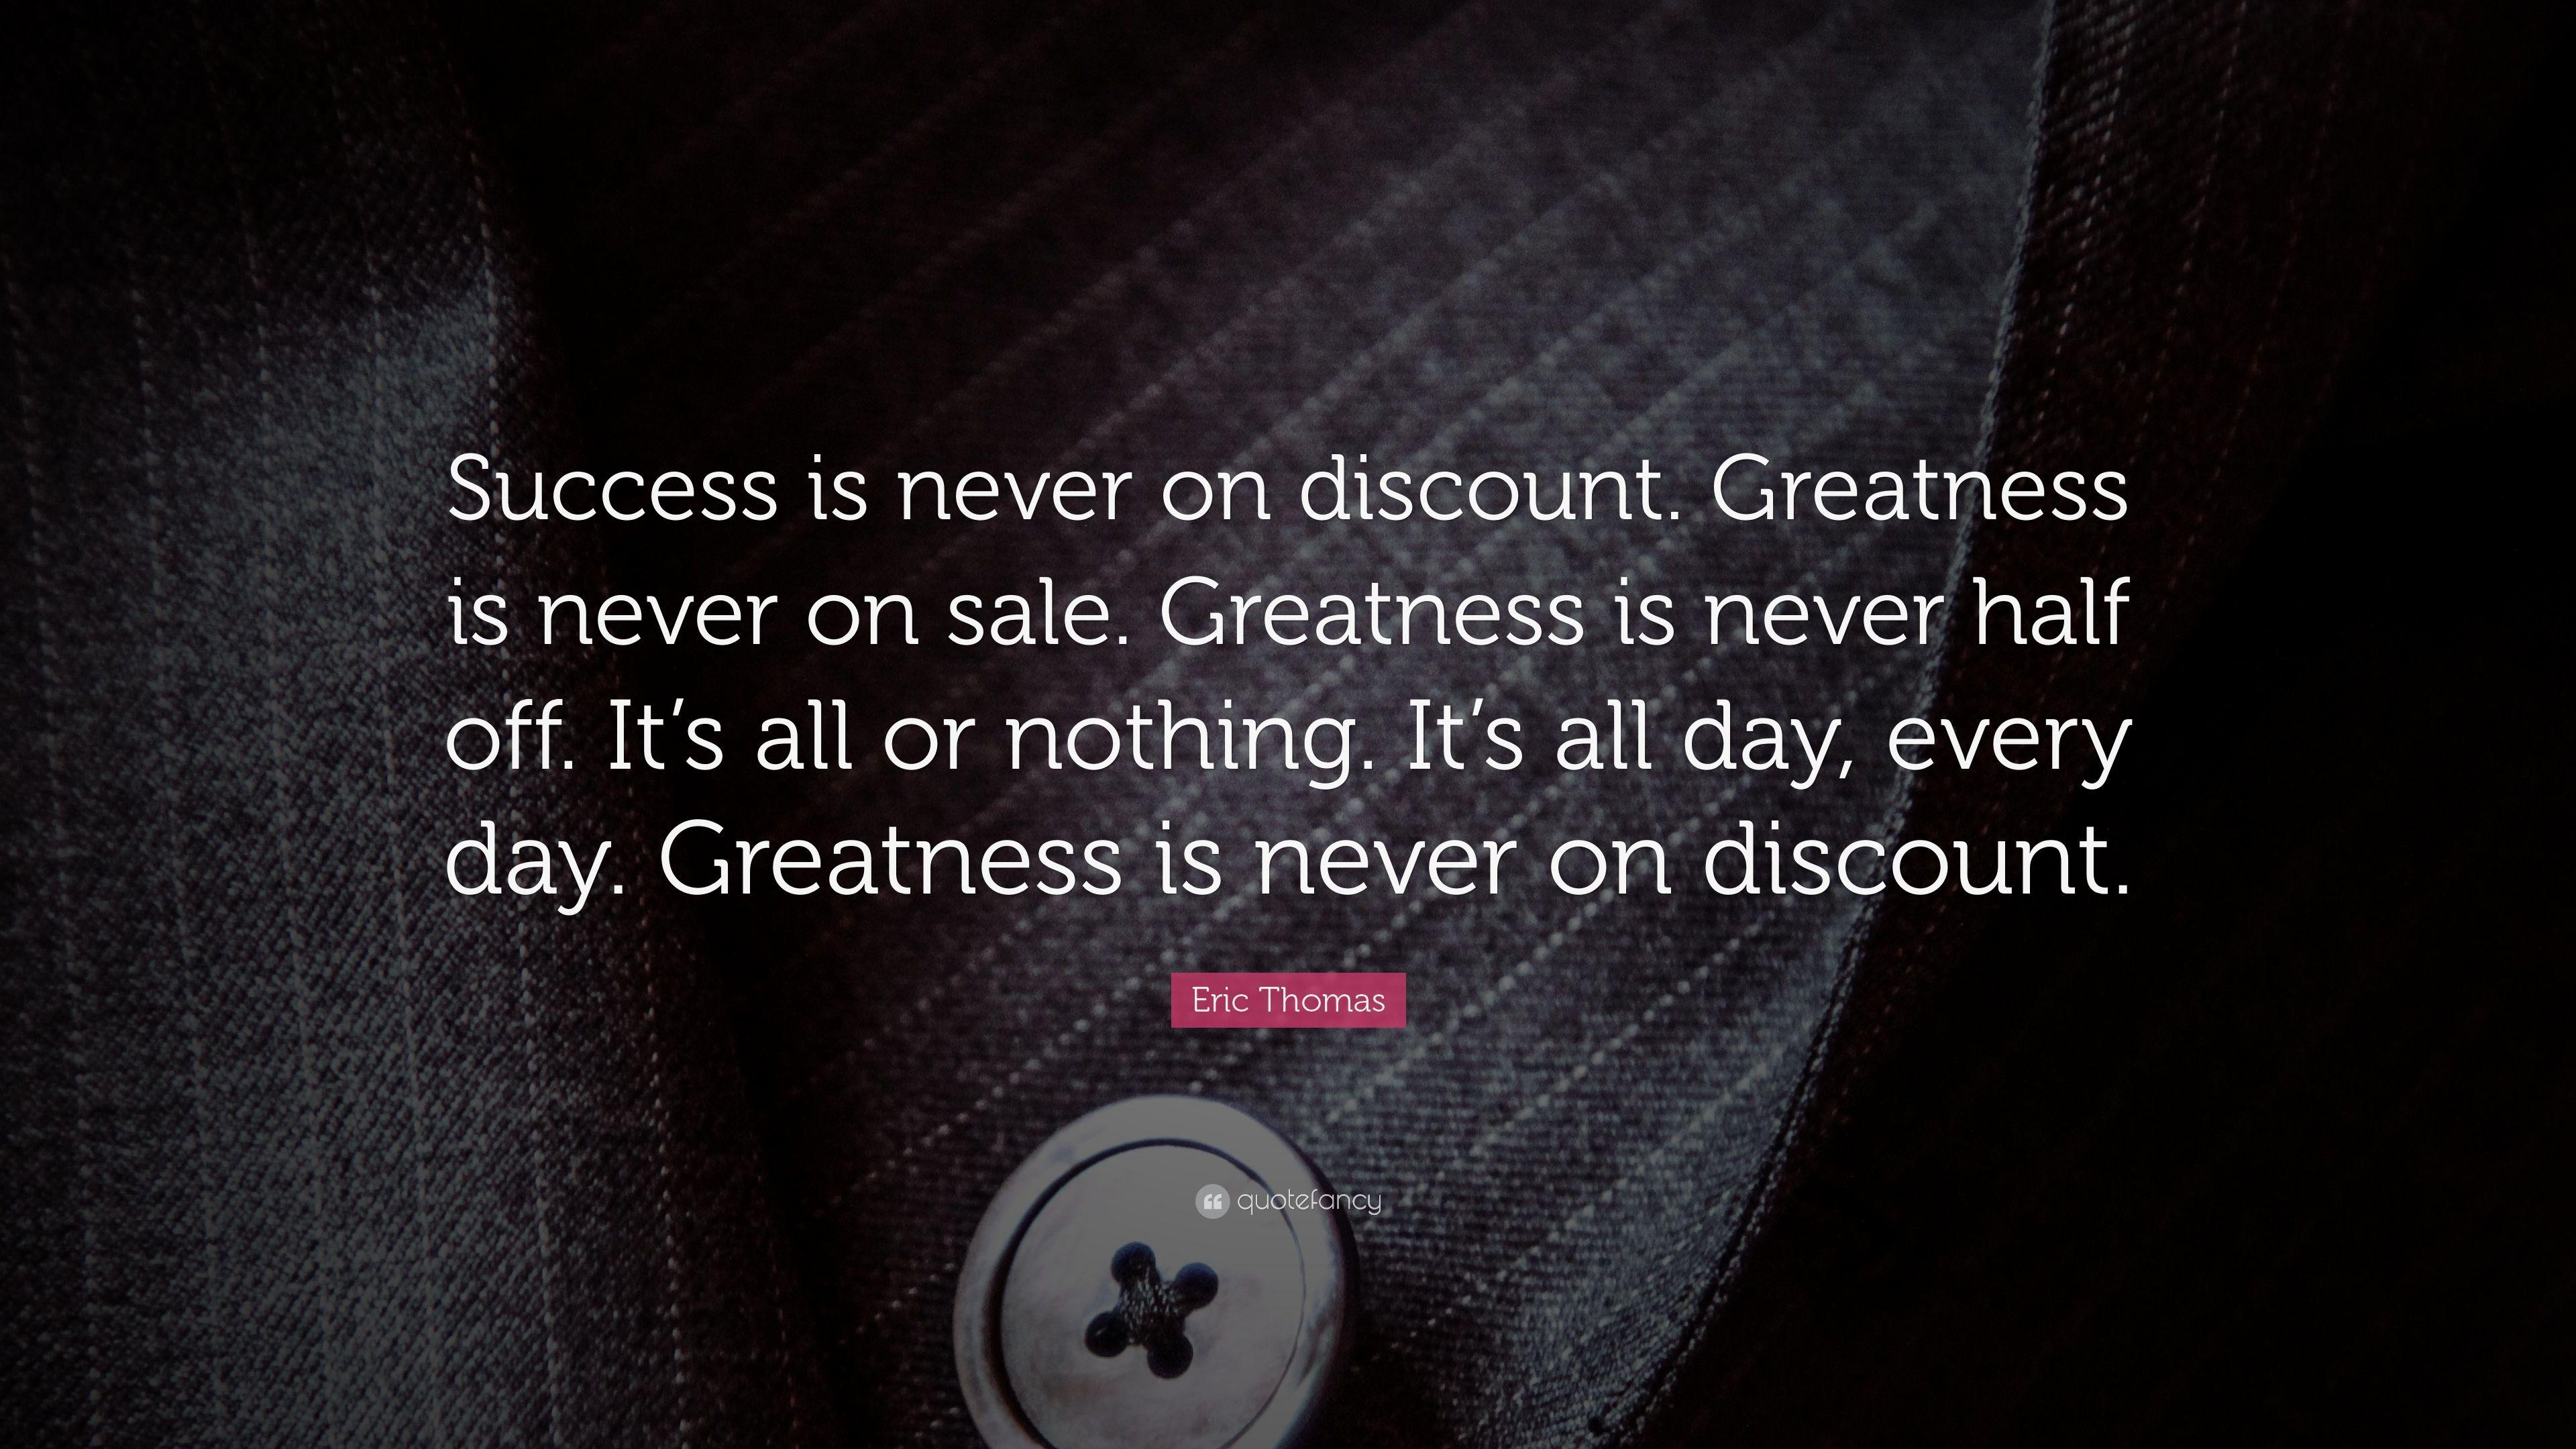 Eric Thomas Quote: “Success is never on discount. Greatness is never